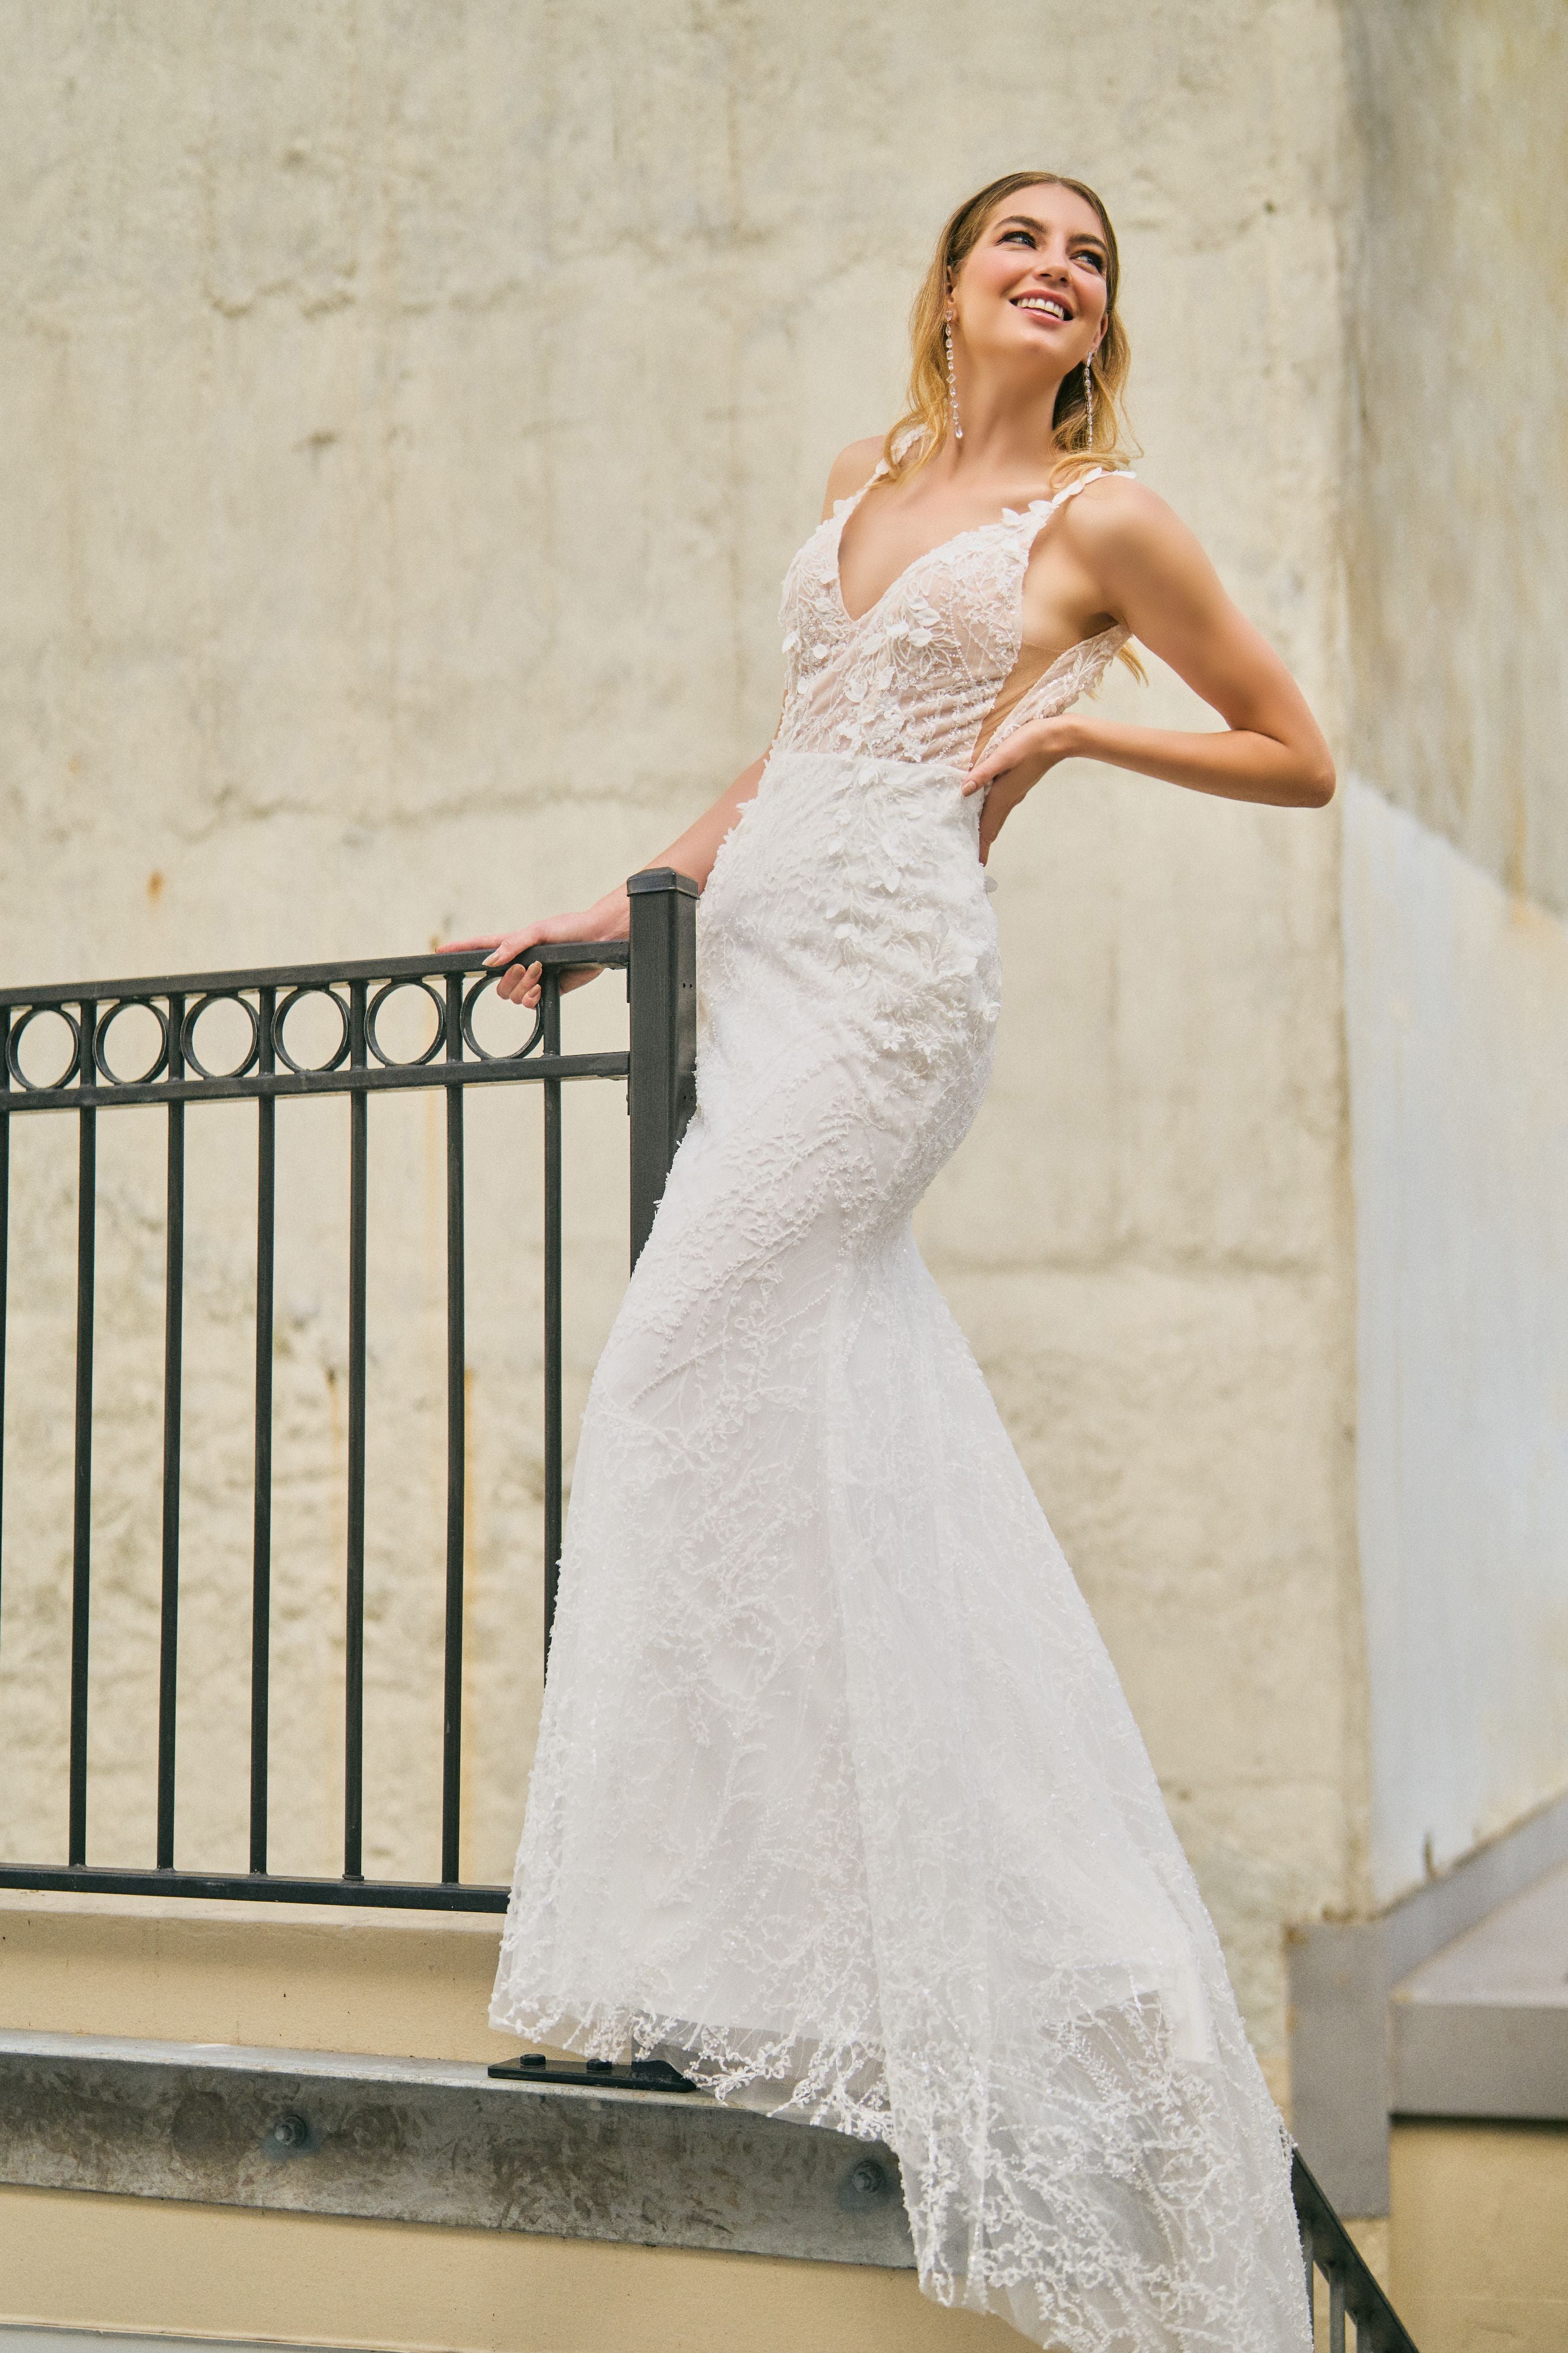 Rochelle wedding dress with mermaid silhouette, beaded and glittery fabric, plunging neckline, low-open back, and leaf detailing on the straps for a modern touch.